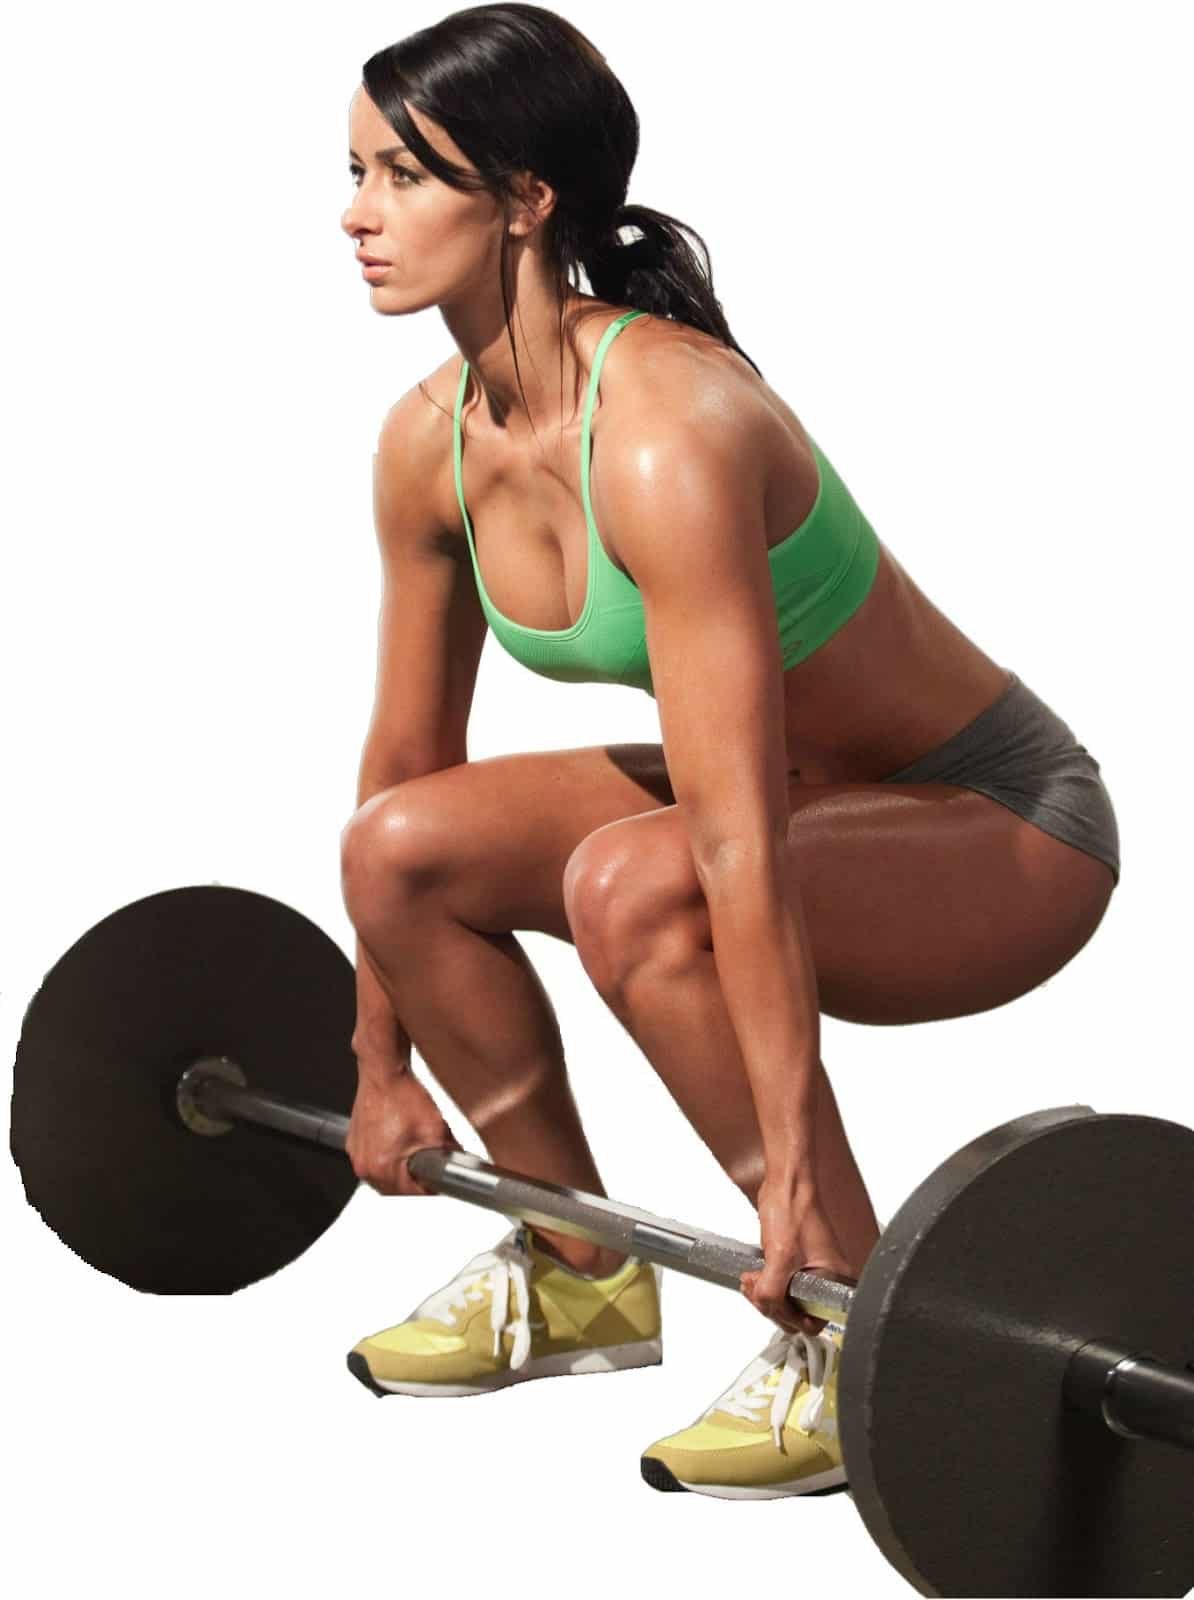 Weight Training And Protein For Women Image